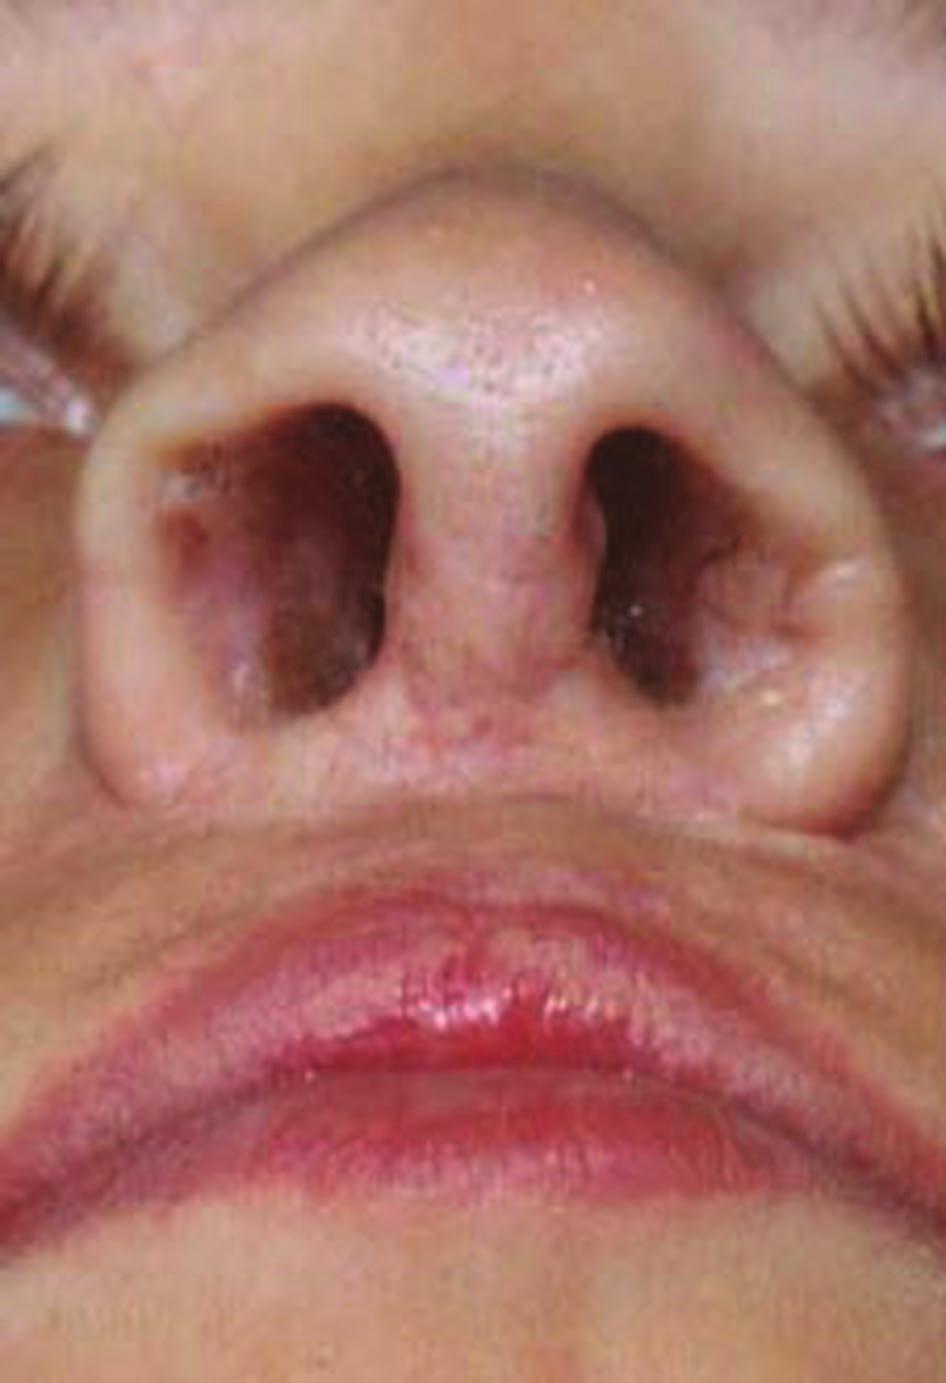 1390 PLASTIC AND RECONSTRUCTIVE SURGERY, April 1, 2002 FIG. 4. An overly long columella, resulting in flip nasal deformity.